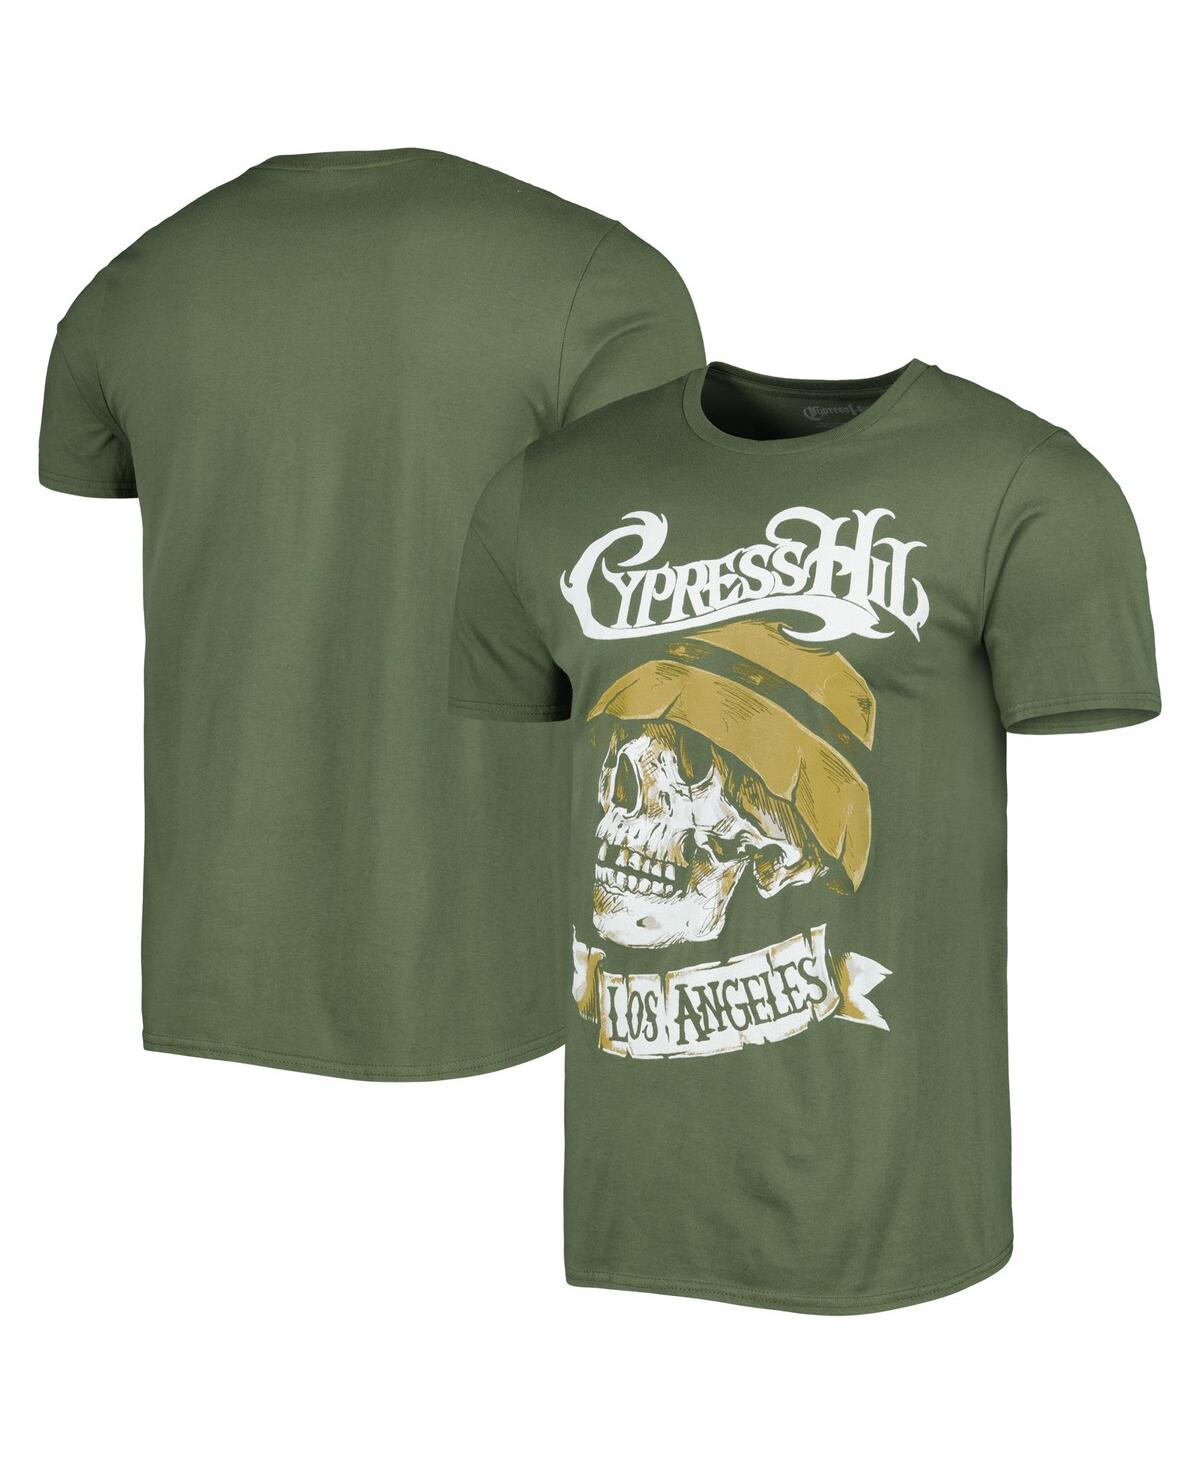 Men's and Women's Olive Cypress Hill Graphic T-shirt - Olive